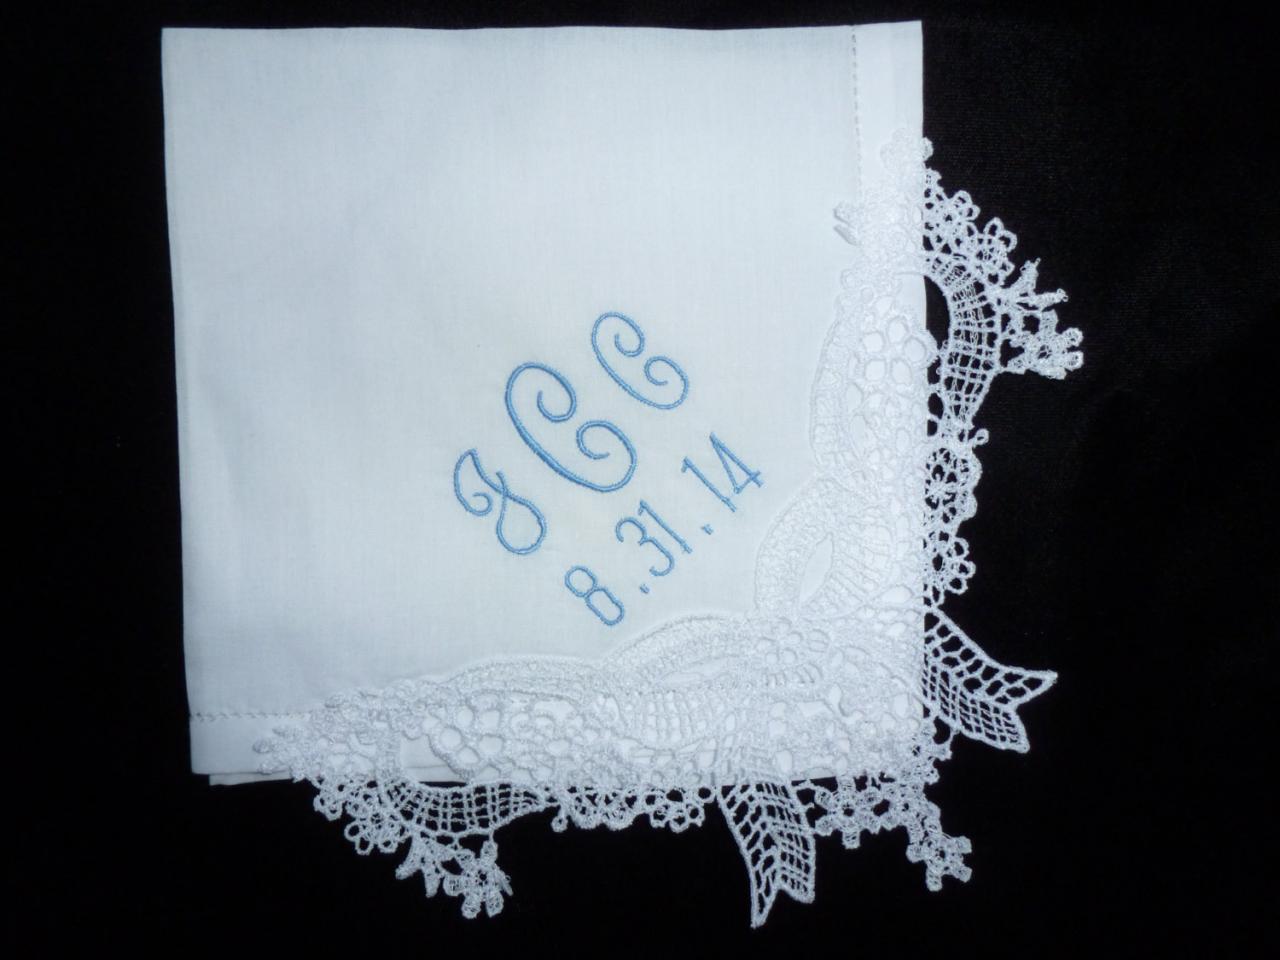 Graceful Personalized Created Lace Hemstitched Cotton Wedding Handkerchief - Initial Impressions Exclusive And Gift Wrap